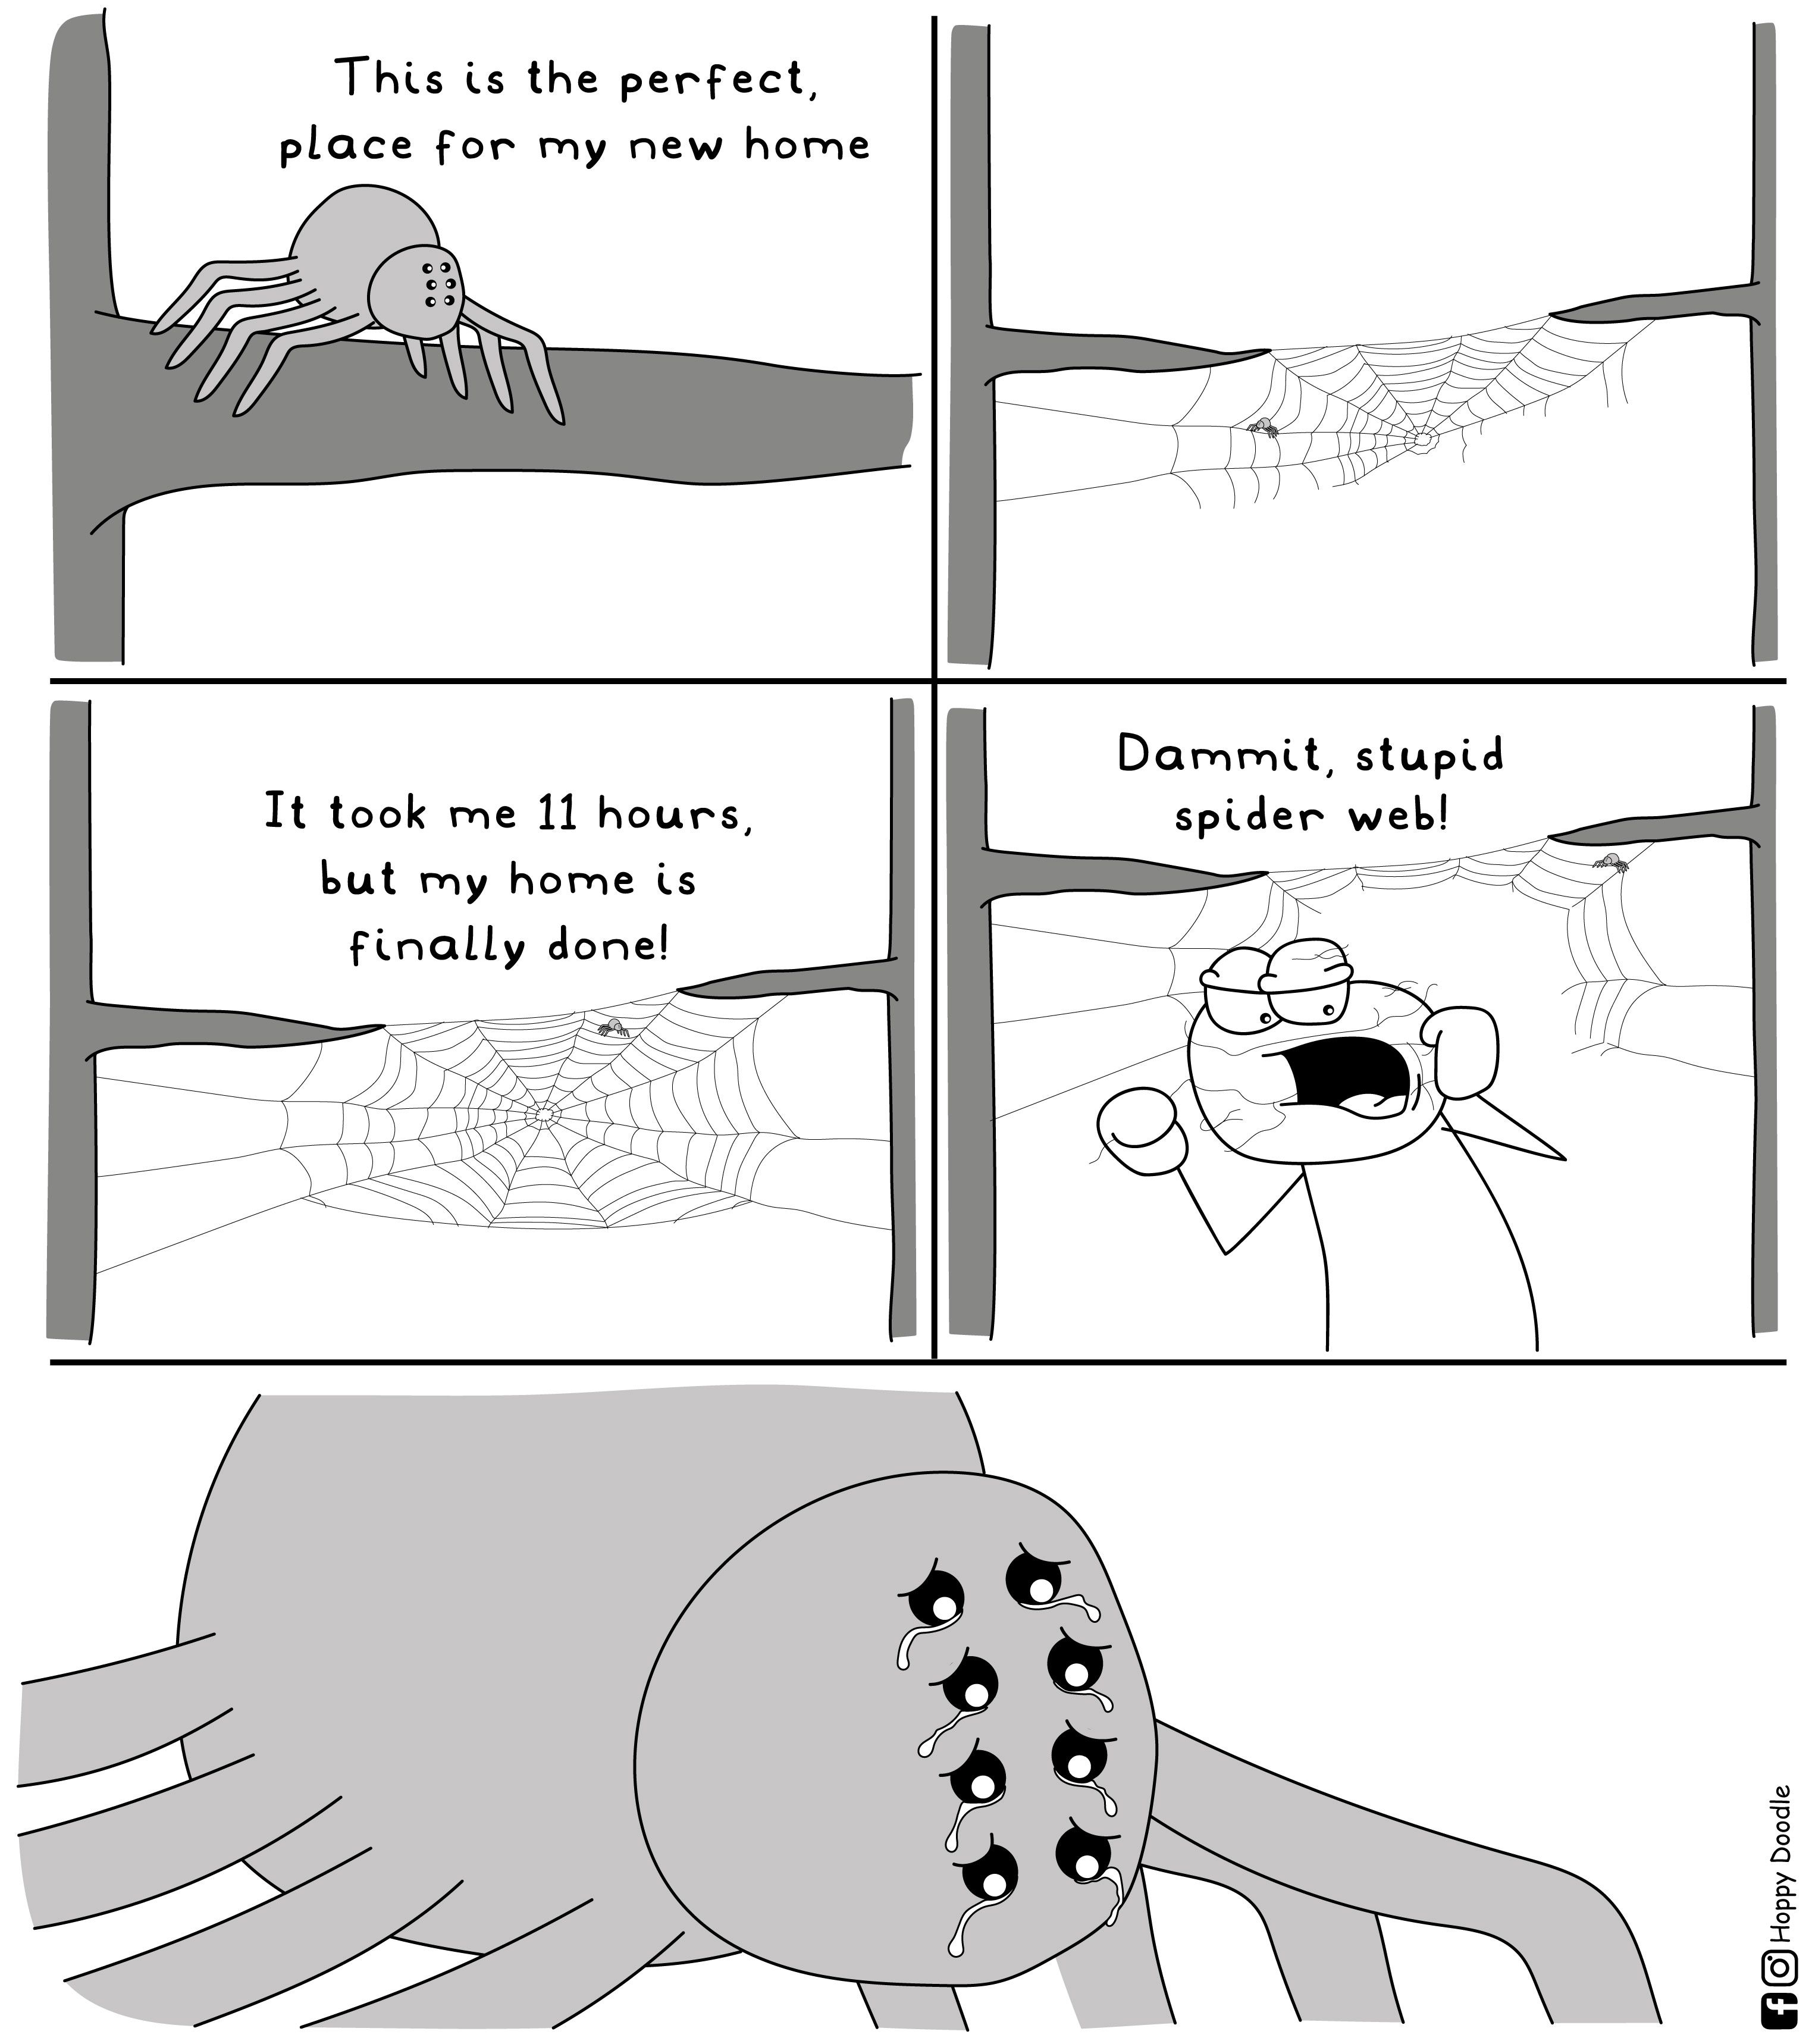 A spider's life